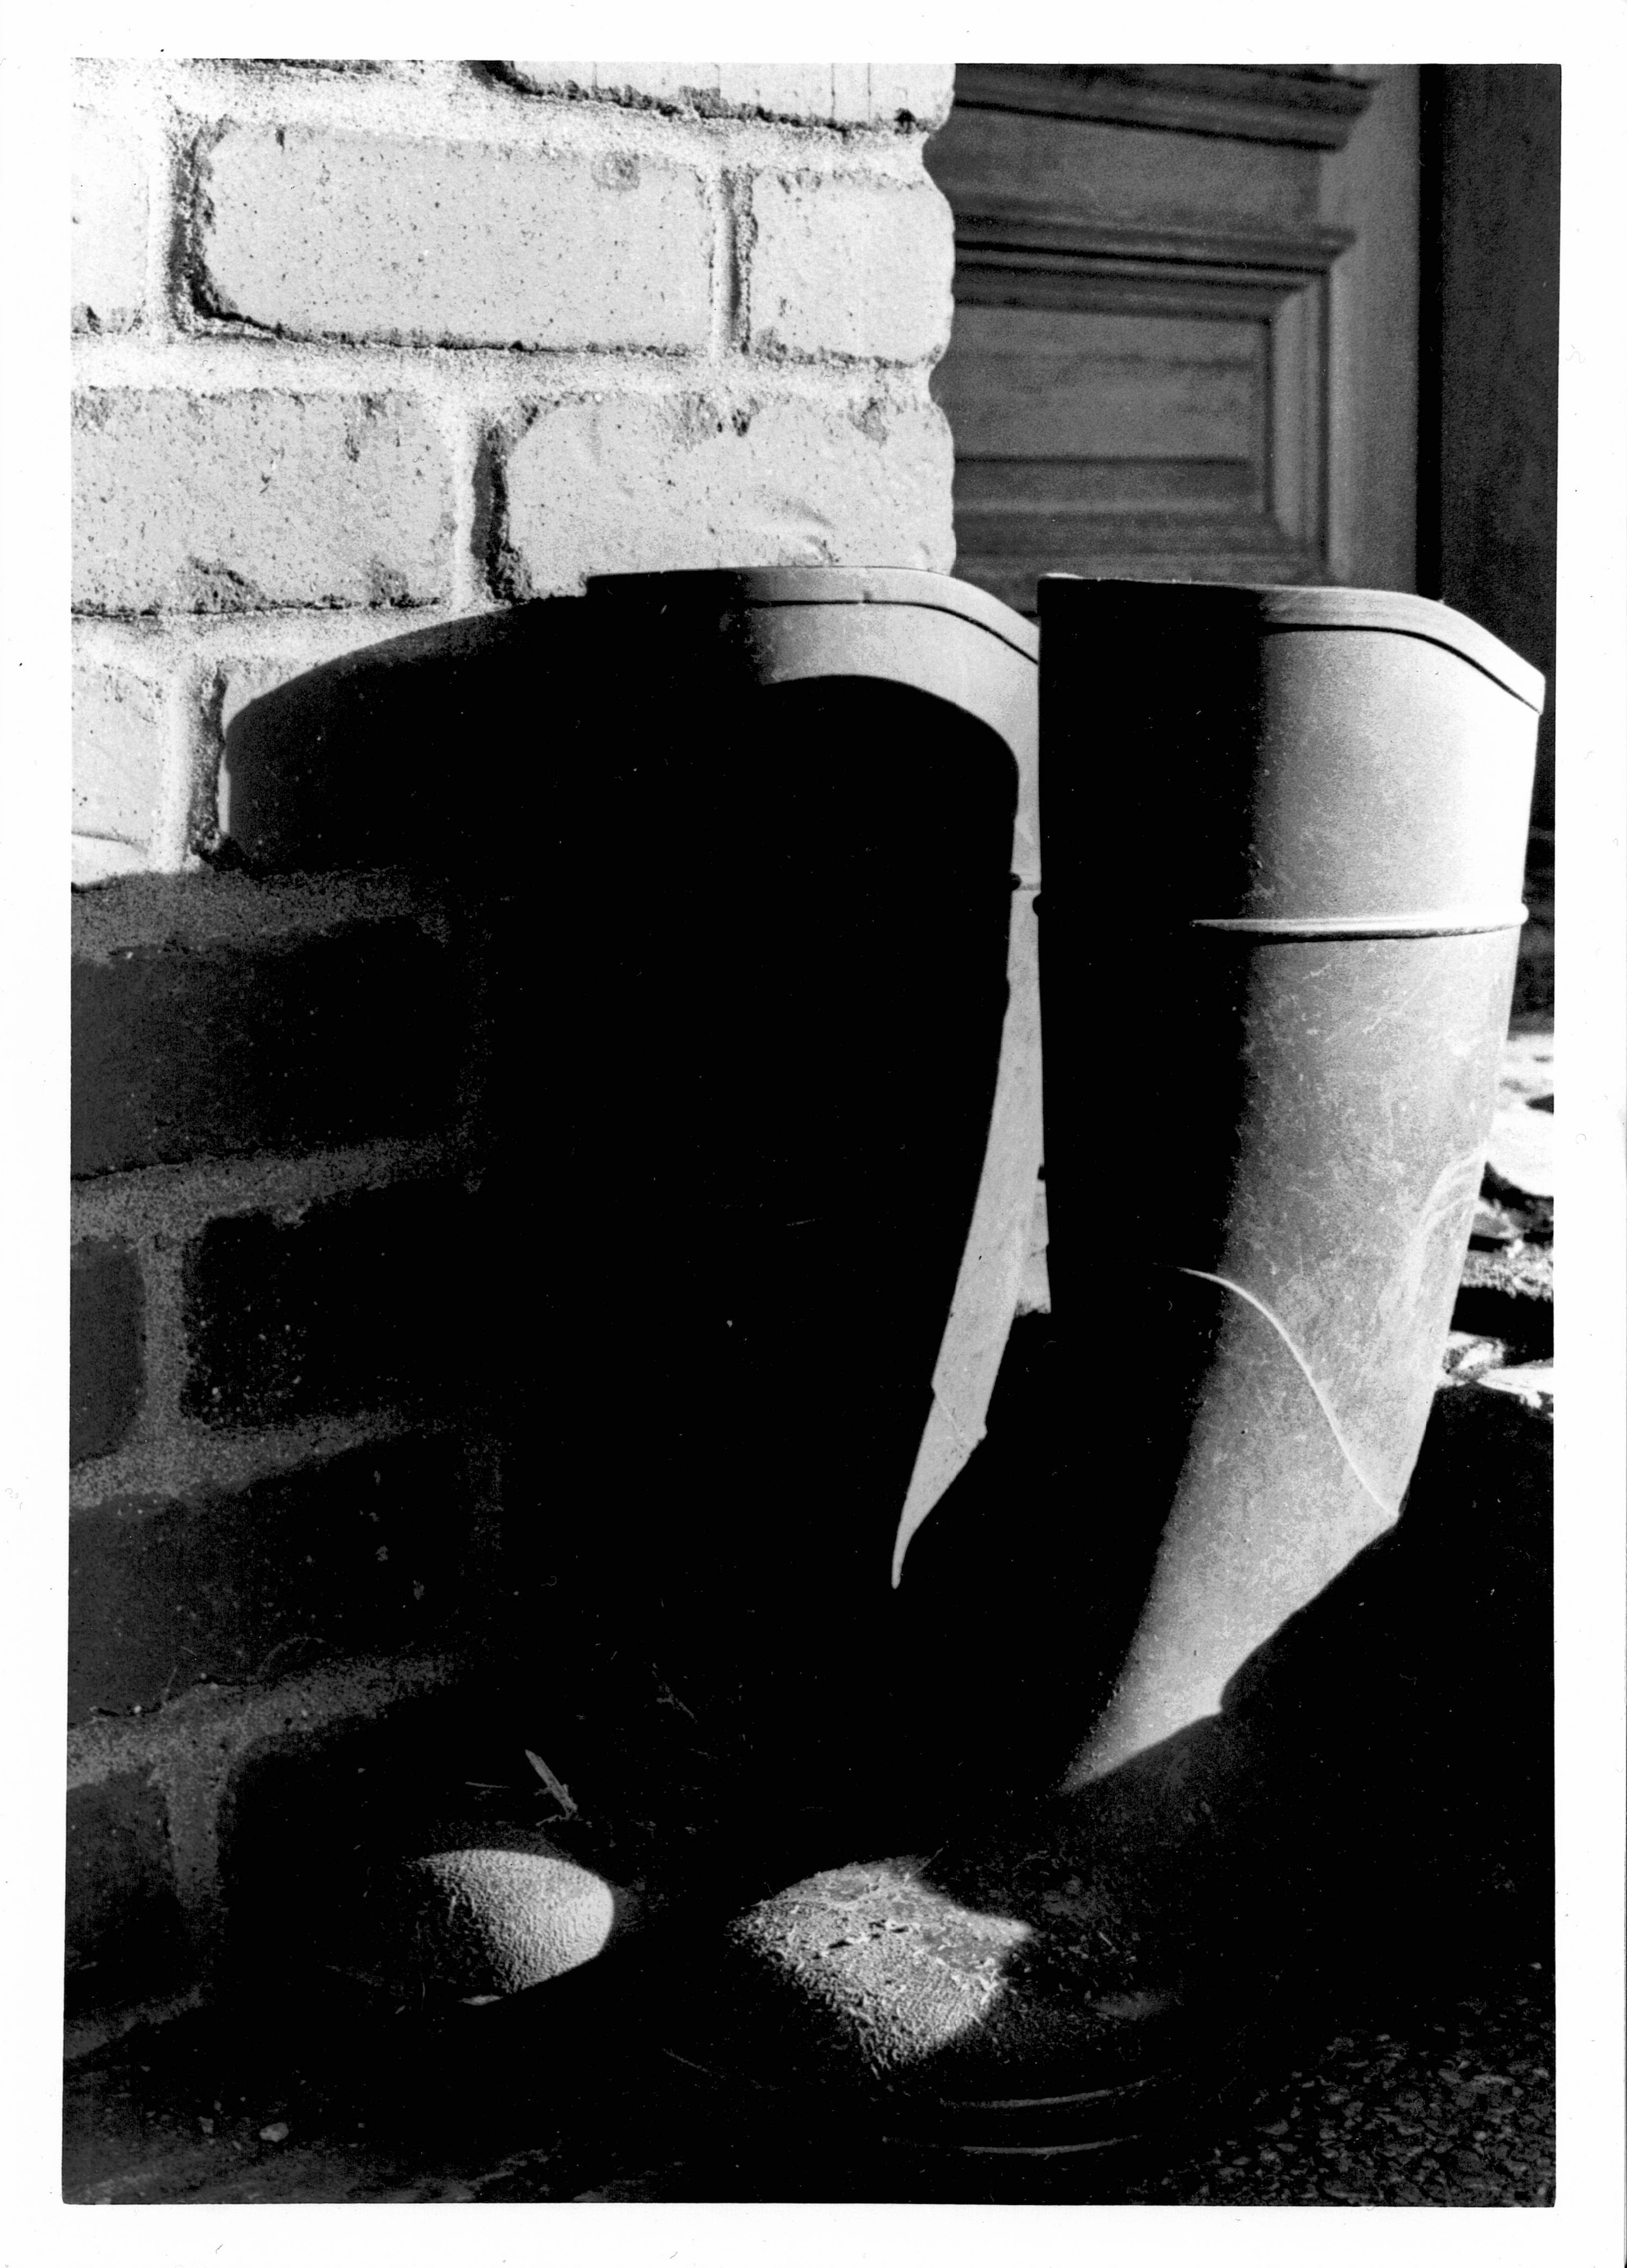 Black and white photograph. Dark shadows dance across something standing against the bricks. It's a pair of rubber work boots. Their shape is mostly obscured, but the side of one boot and the toes are brightly illuminated.